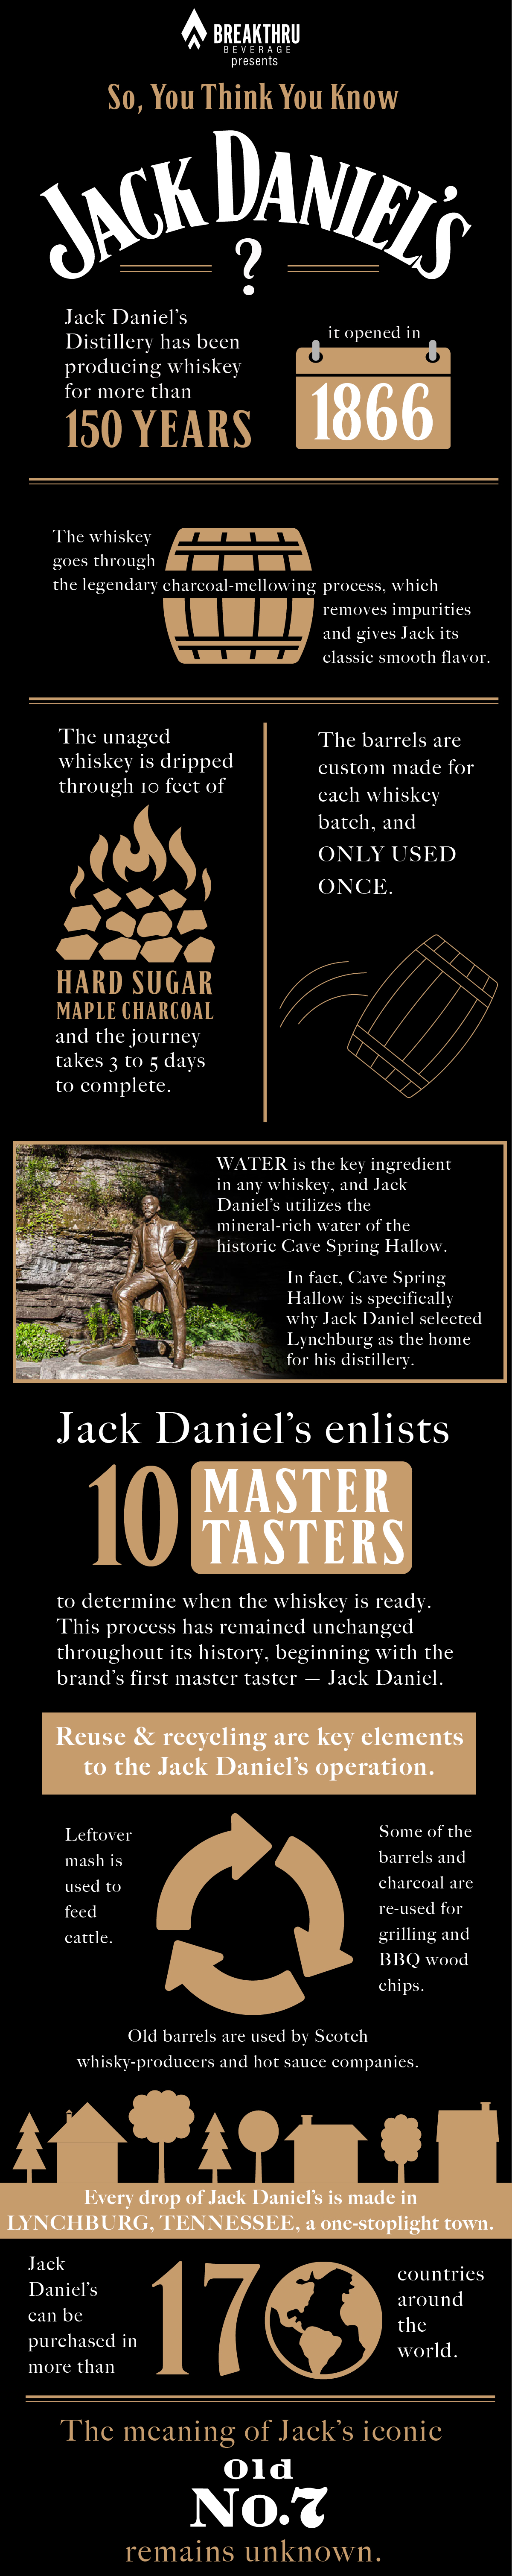 So, You Think You Know Jack Daniel's?